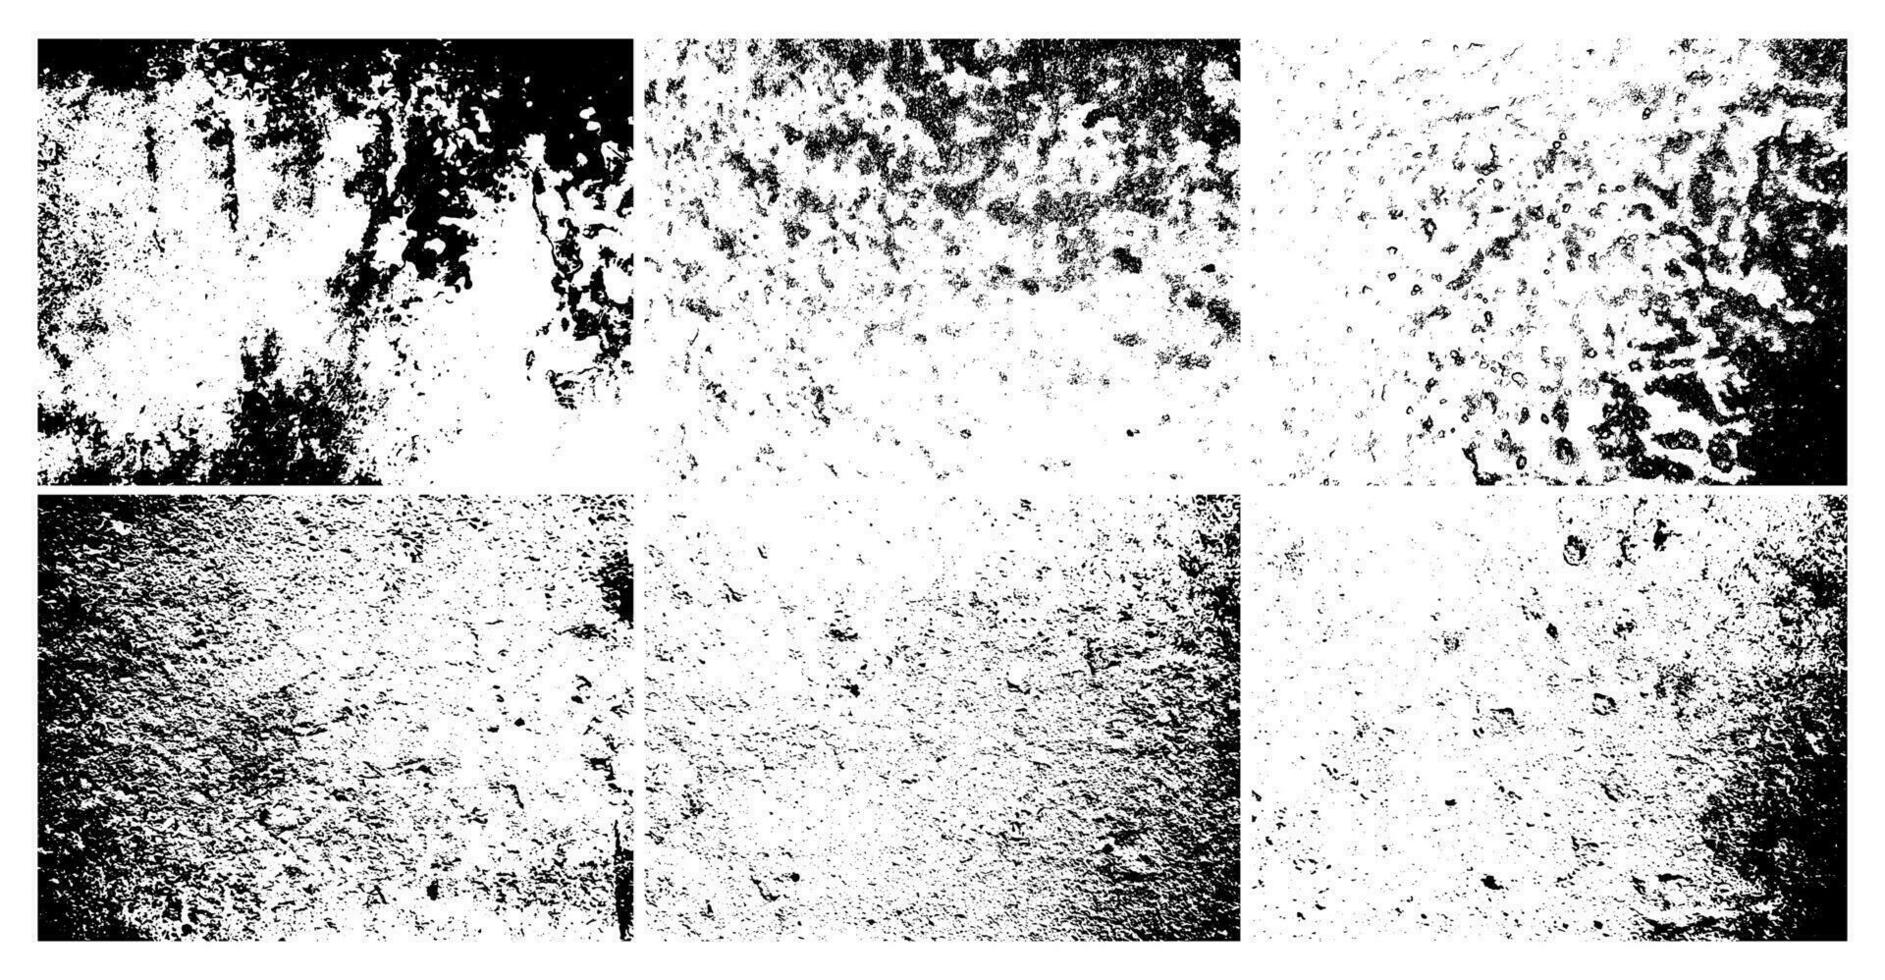 Grunge grainy dirty texture. Set of six abstract urban distress overlay backgrounds. Vector illustration